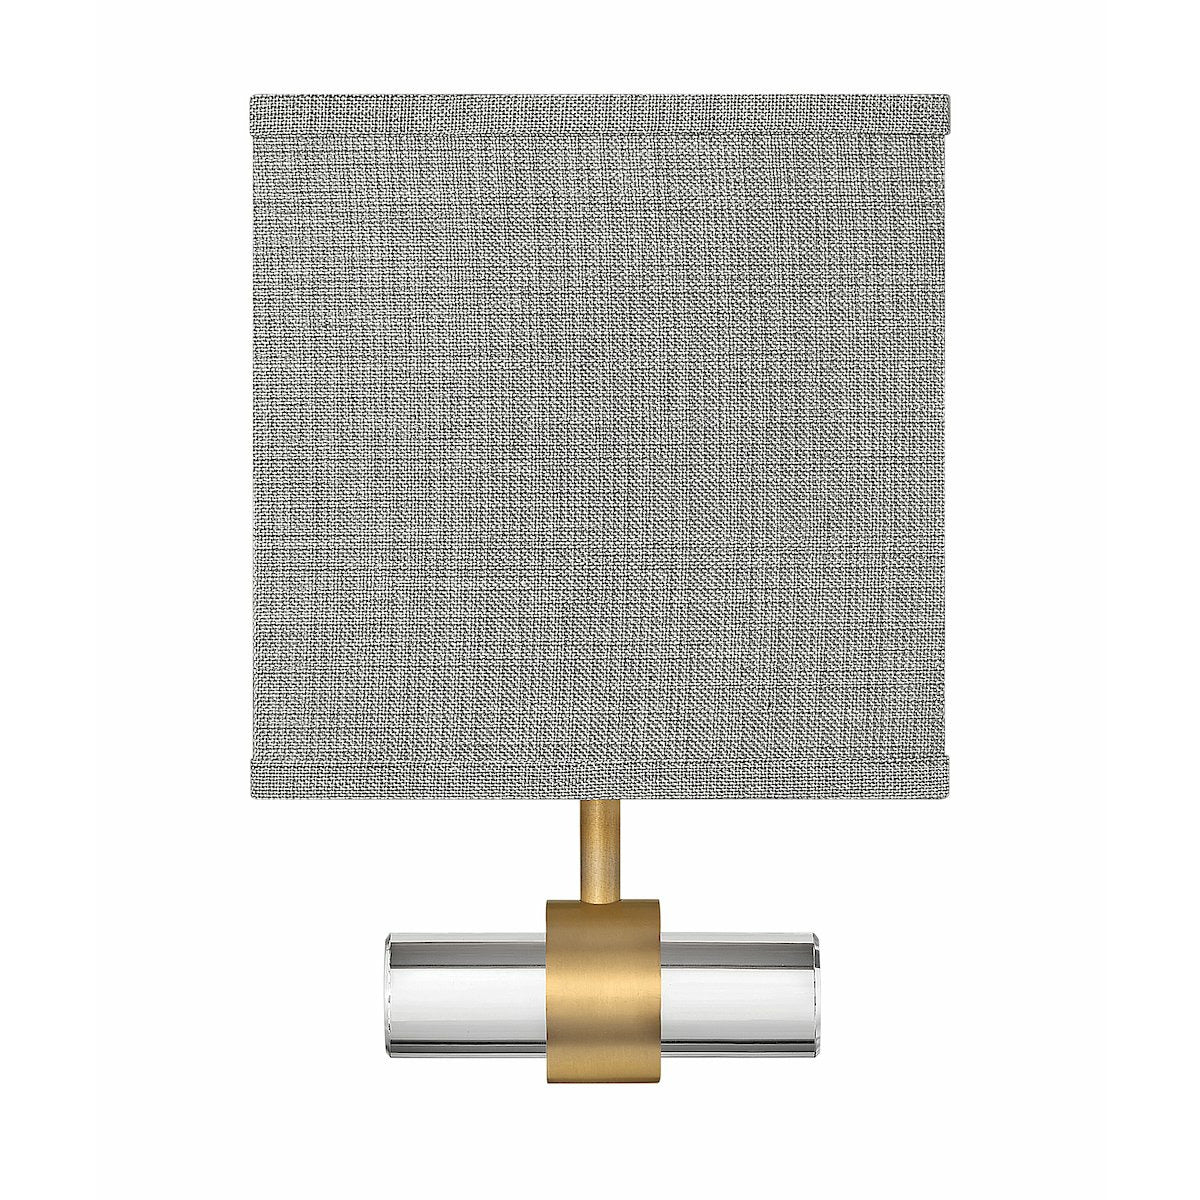 Luster Sconce Heritage Brass